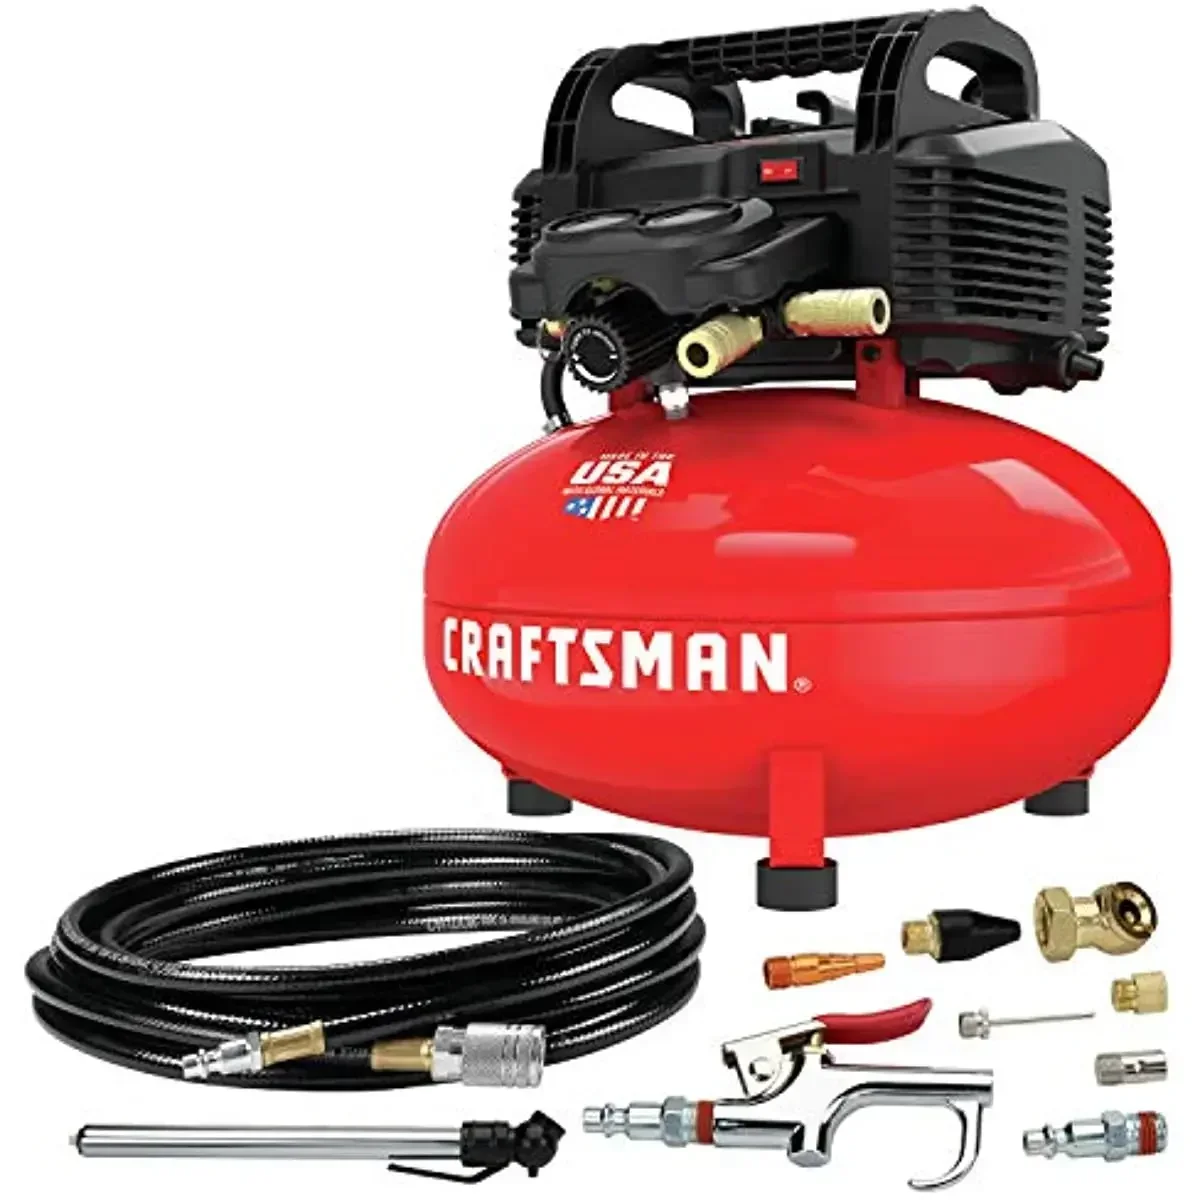 Craftsman Air Compressor 6 Gallon Pancake Oil-Free with 13 Piece Accessory Kit (CMEC6150K) trimmer head for craftsman wc205 wc210 wc215 wc2200 ws205 ws210 ws215 ws2200 garden brush cutter strimmer parts with bump knob